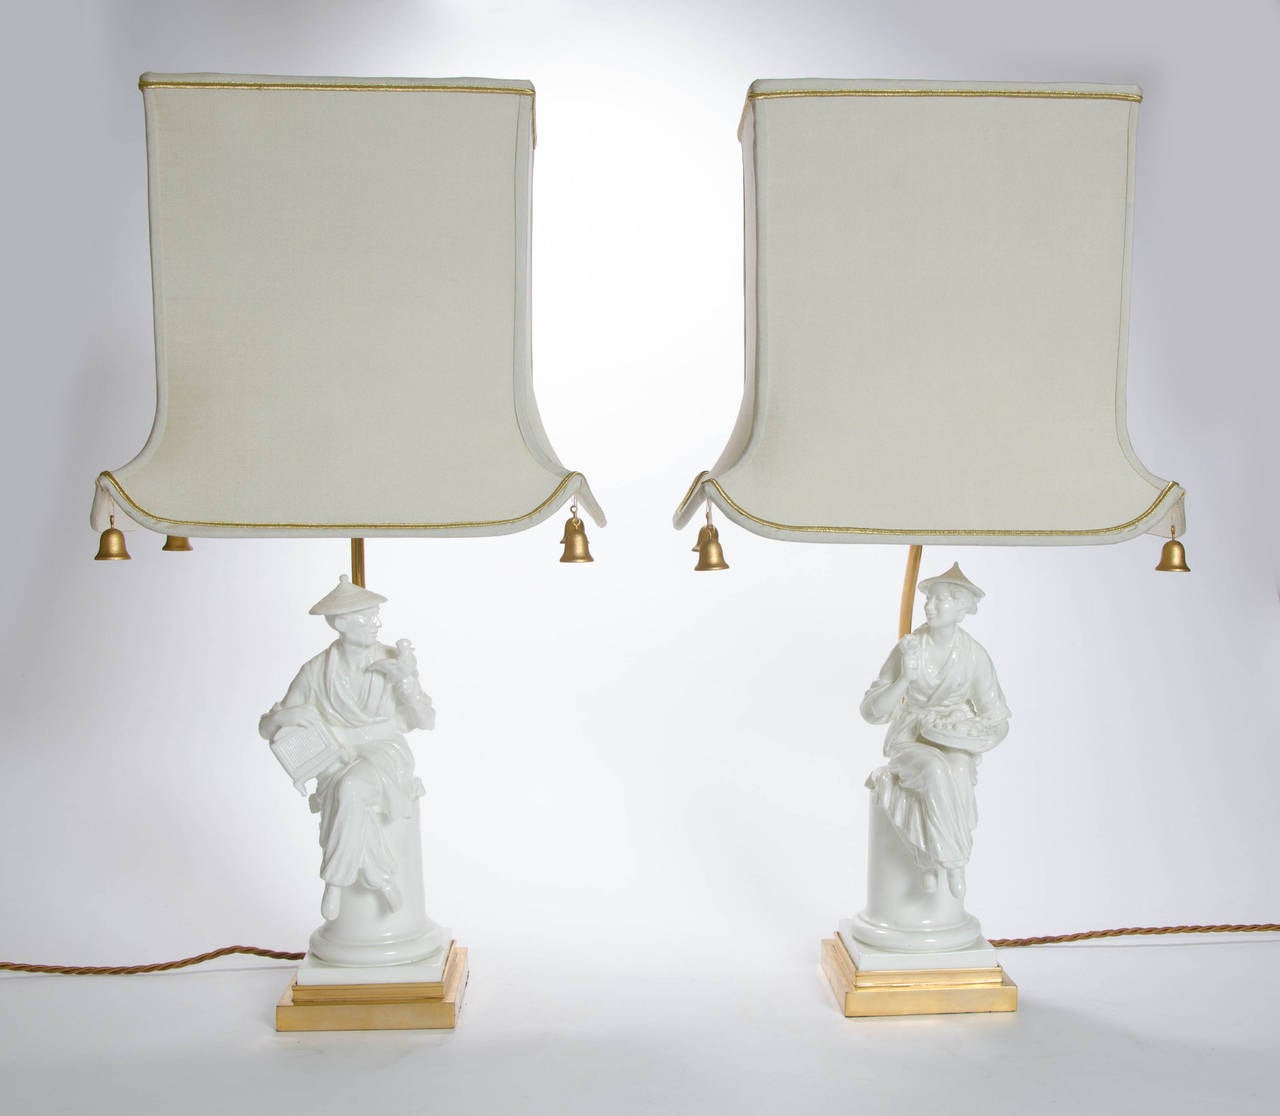 A pair of Royal Worcester chinoiserie figures as lamps on gilt bases. 

Height including shade: 64 cm.